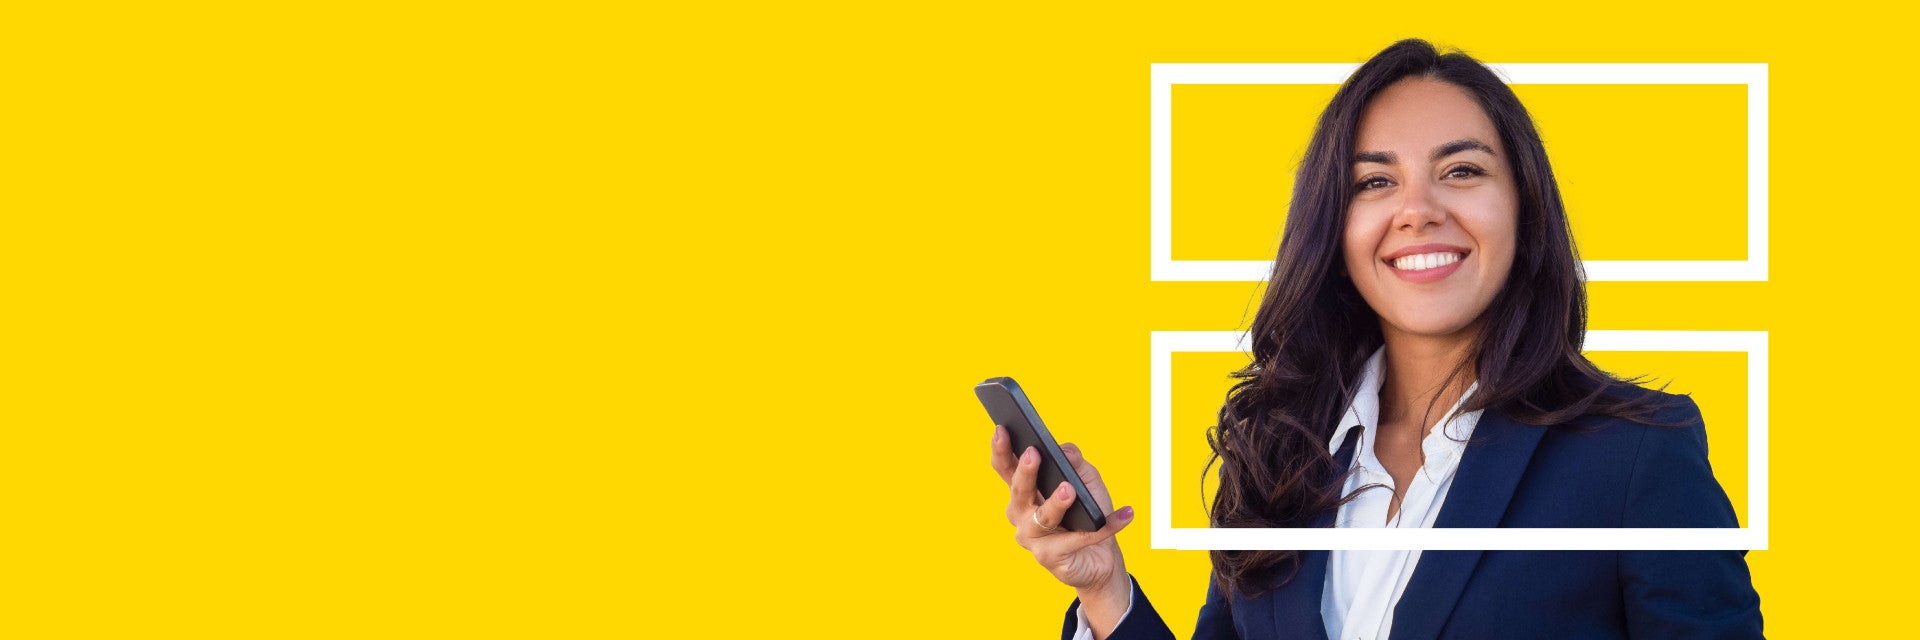 Banner image of a young woman holding a cell phone